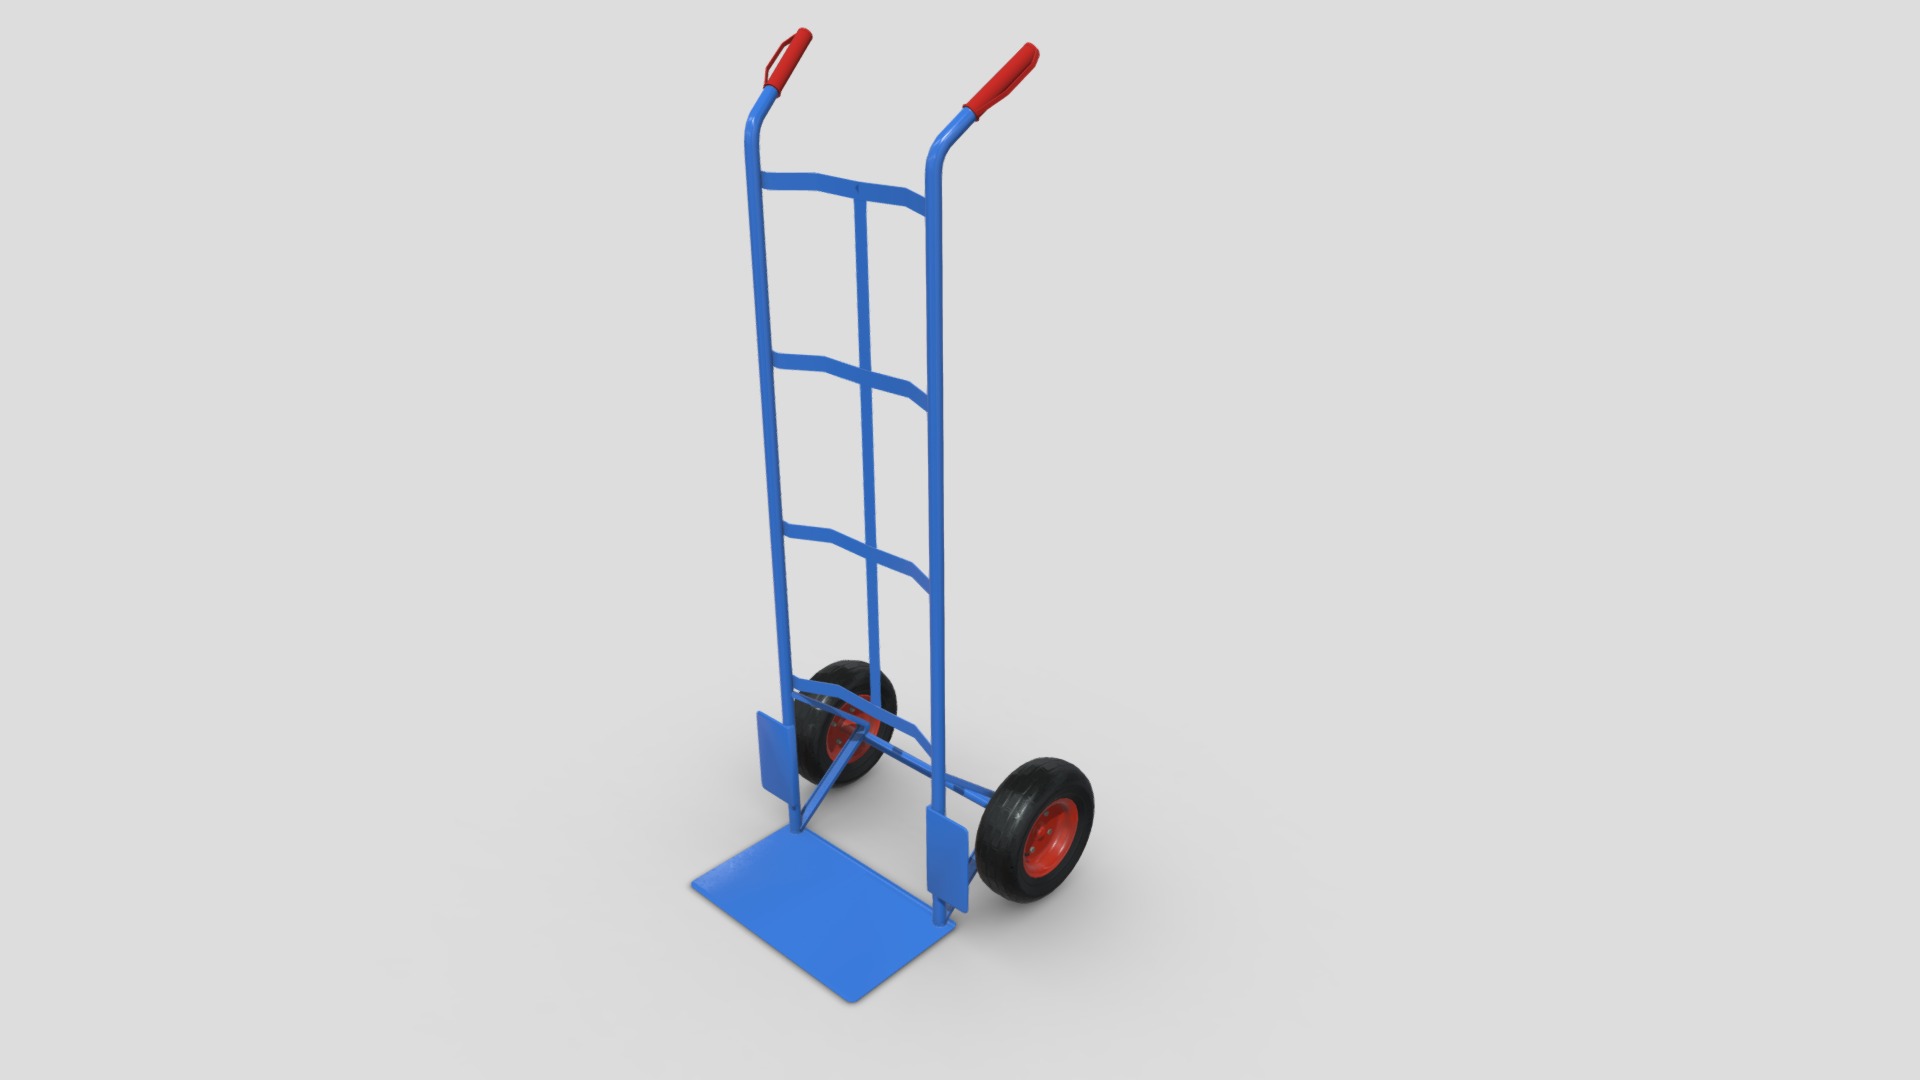 3D model Industrial Hand Trolley 1 - This is a 3D model of the Industrial Hand Trolley 1. The 3D model is about a blue and white roller coaster.